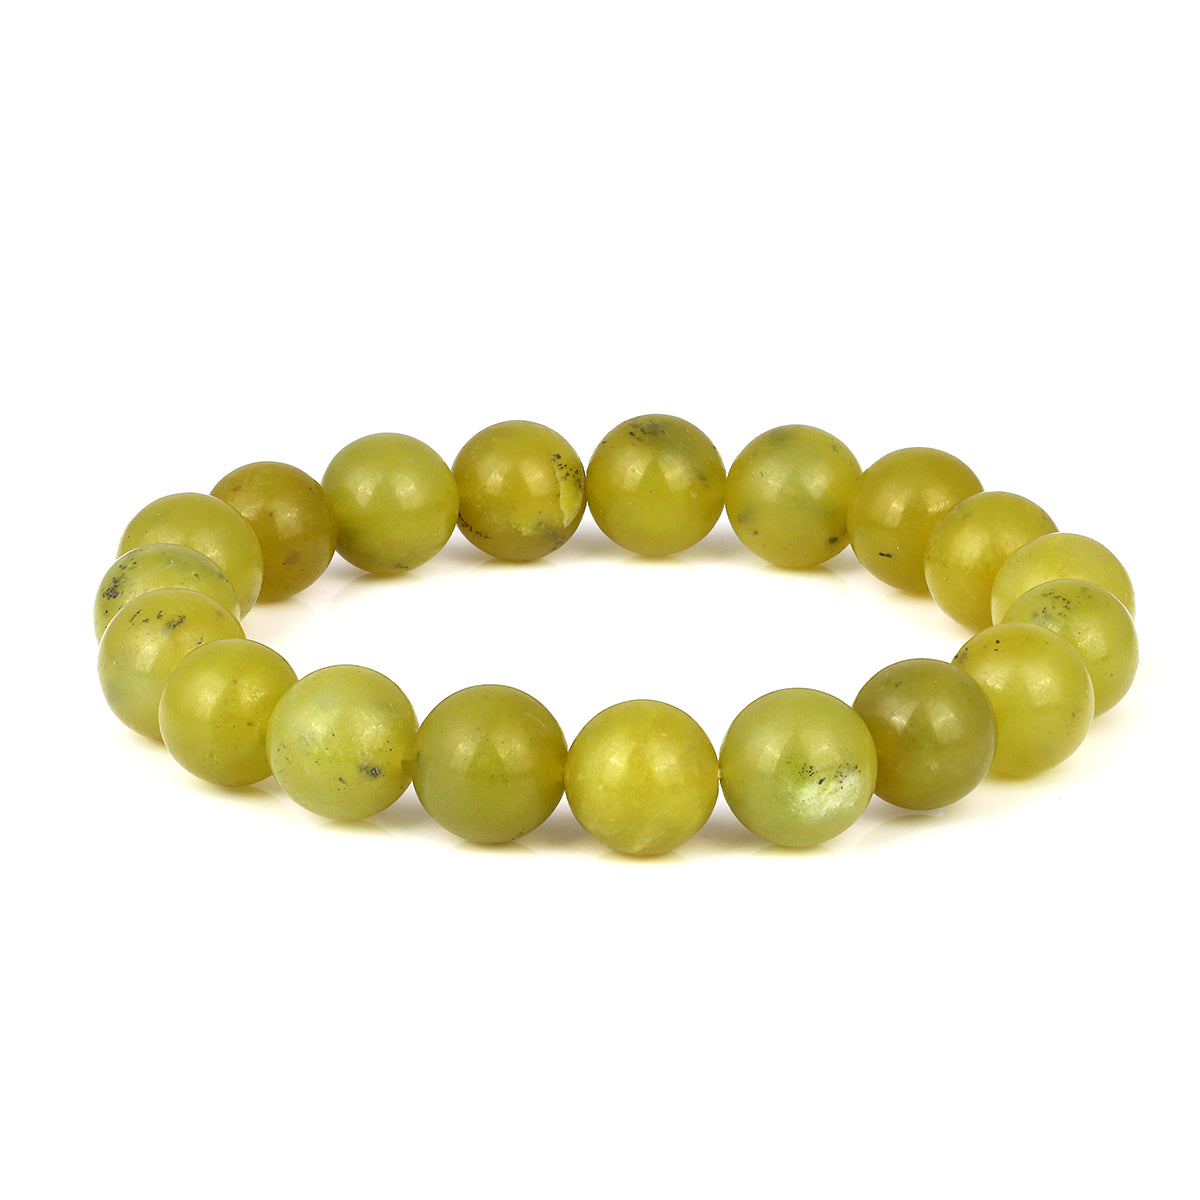 Buy Crystu Natural Serpentine Bracelet Crystal Stone 8mm Faceted Bead  Bracelet for Reiki Healing and Crystal Healing Stone (Color : Green) at  Amazon.in